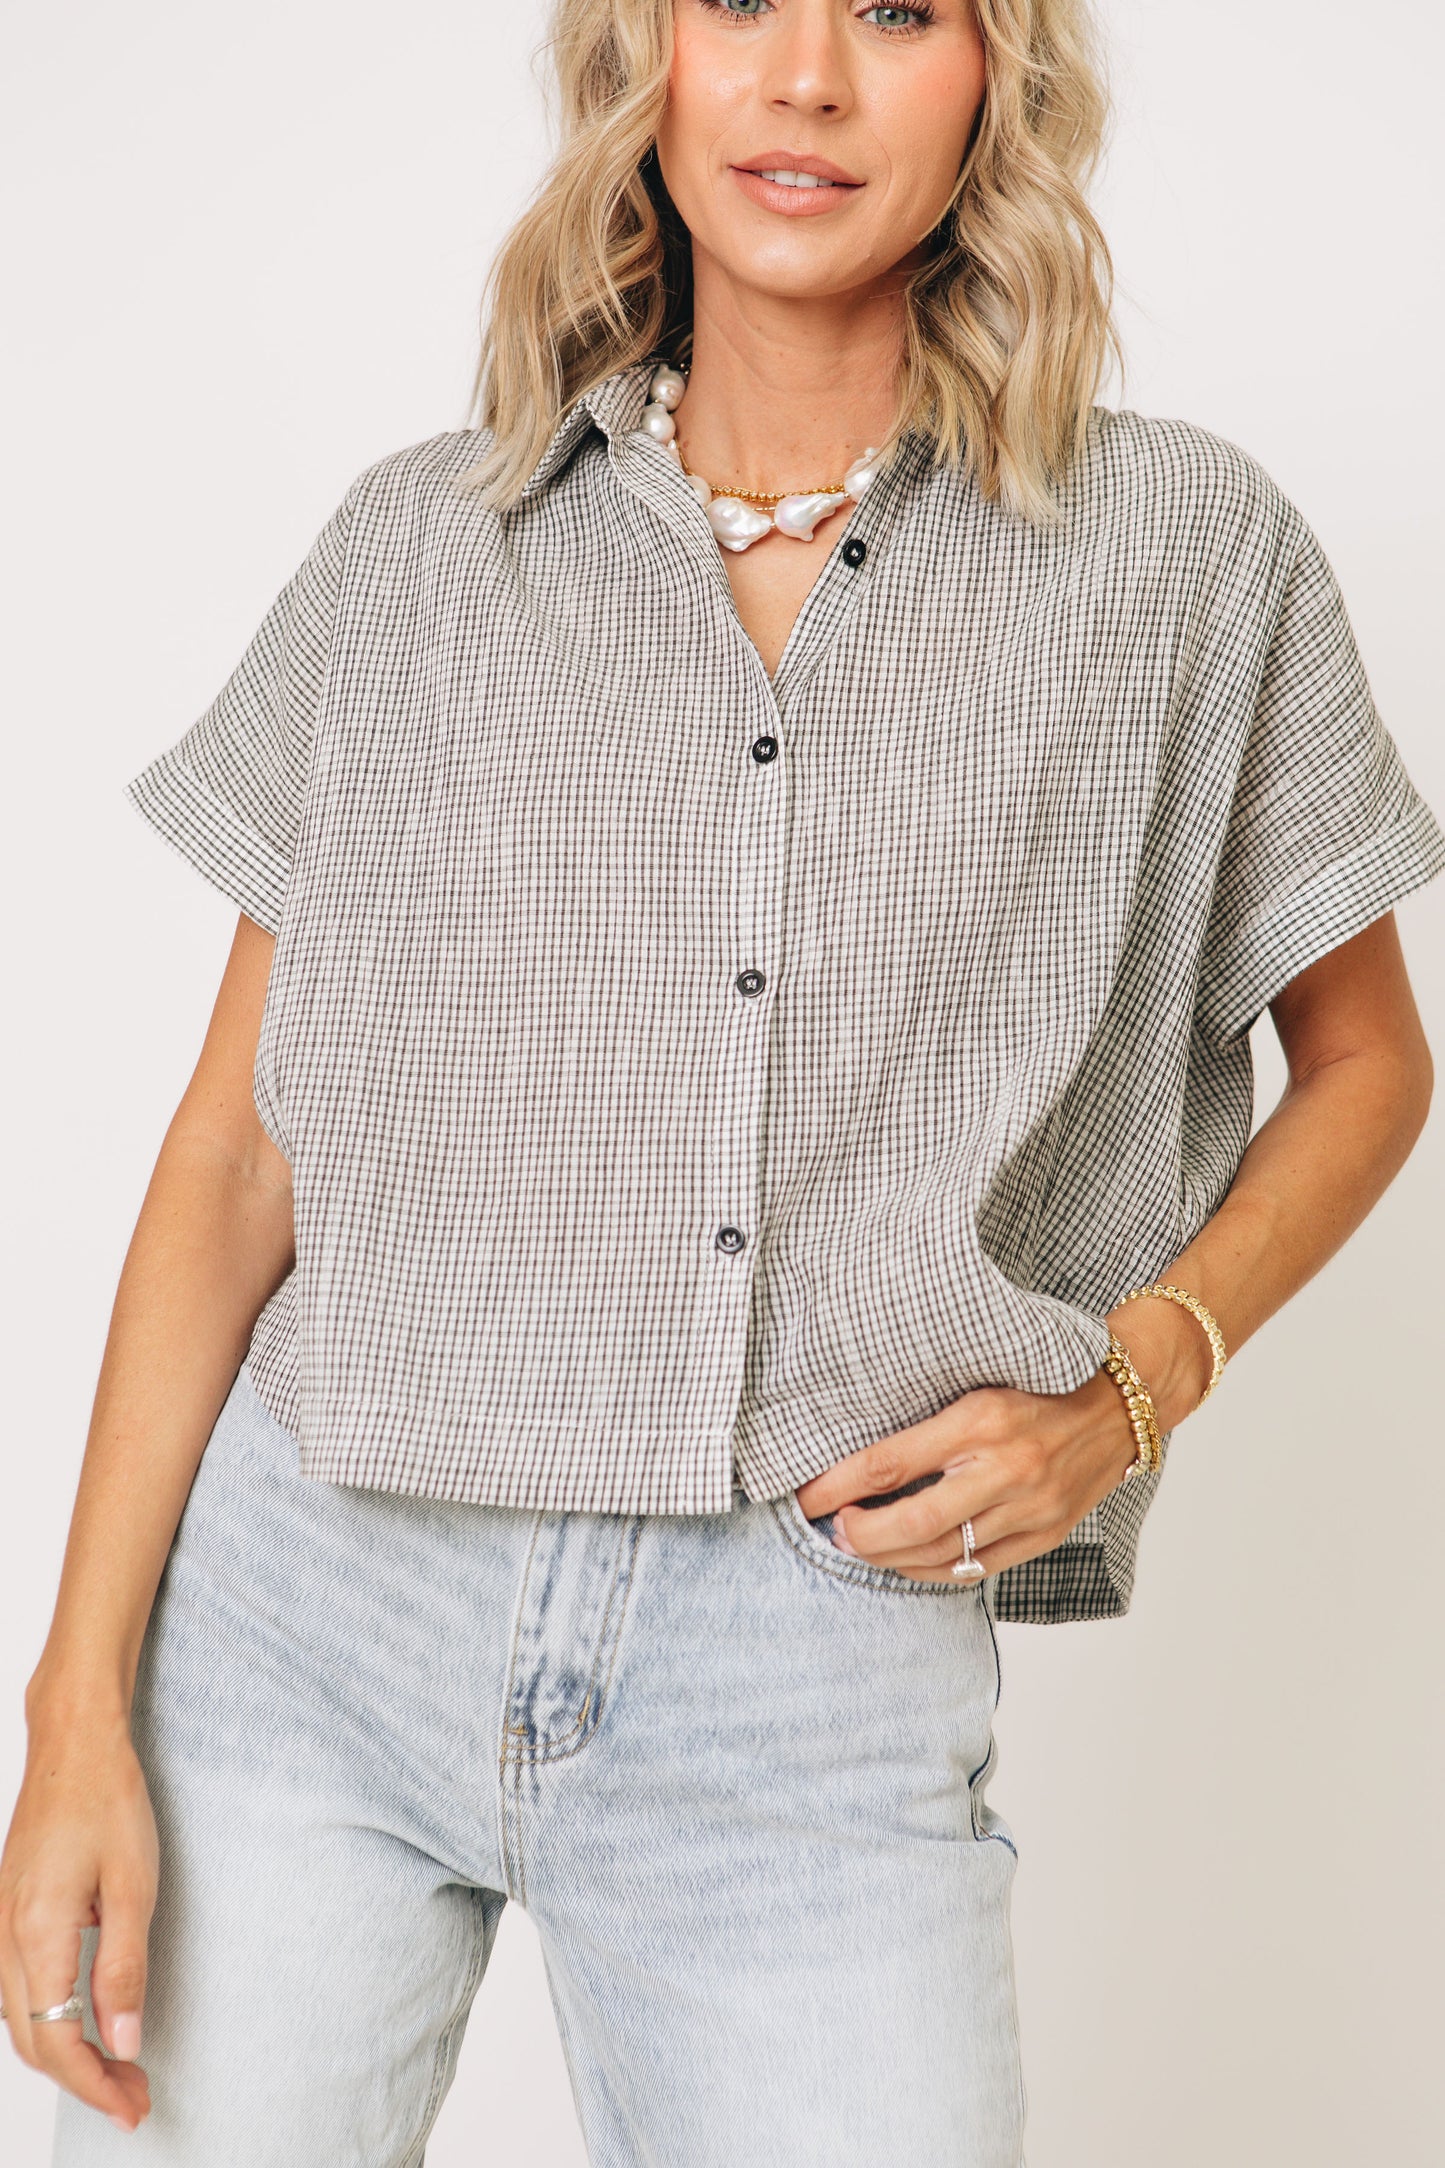 Button Down Short Sleeve Top (S-L)